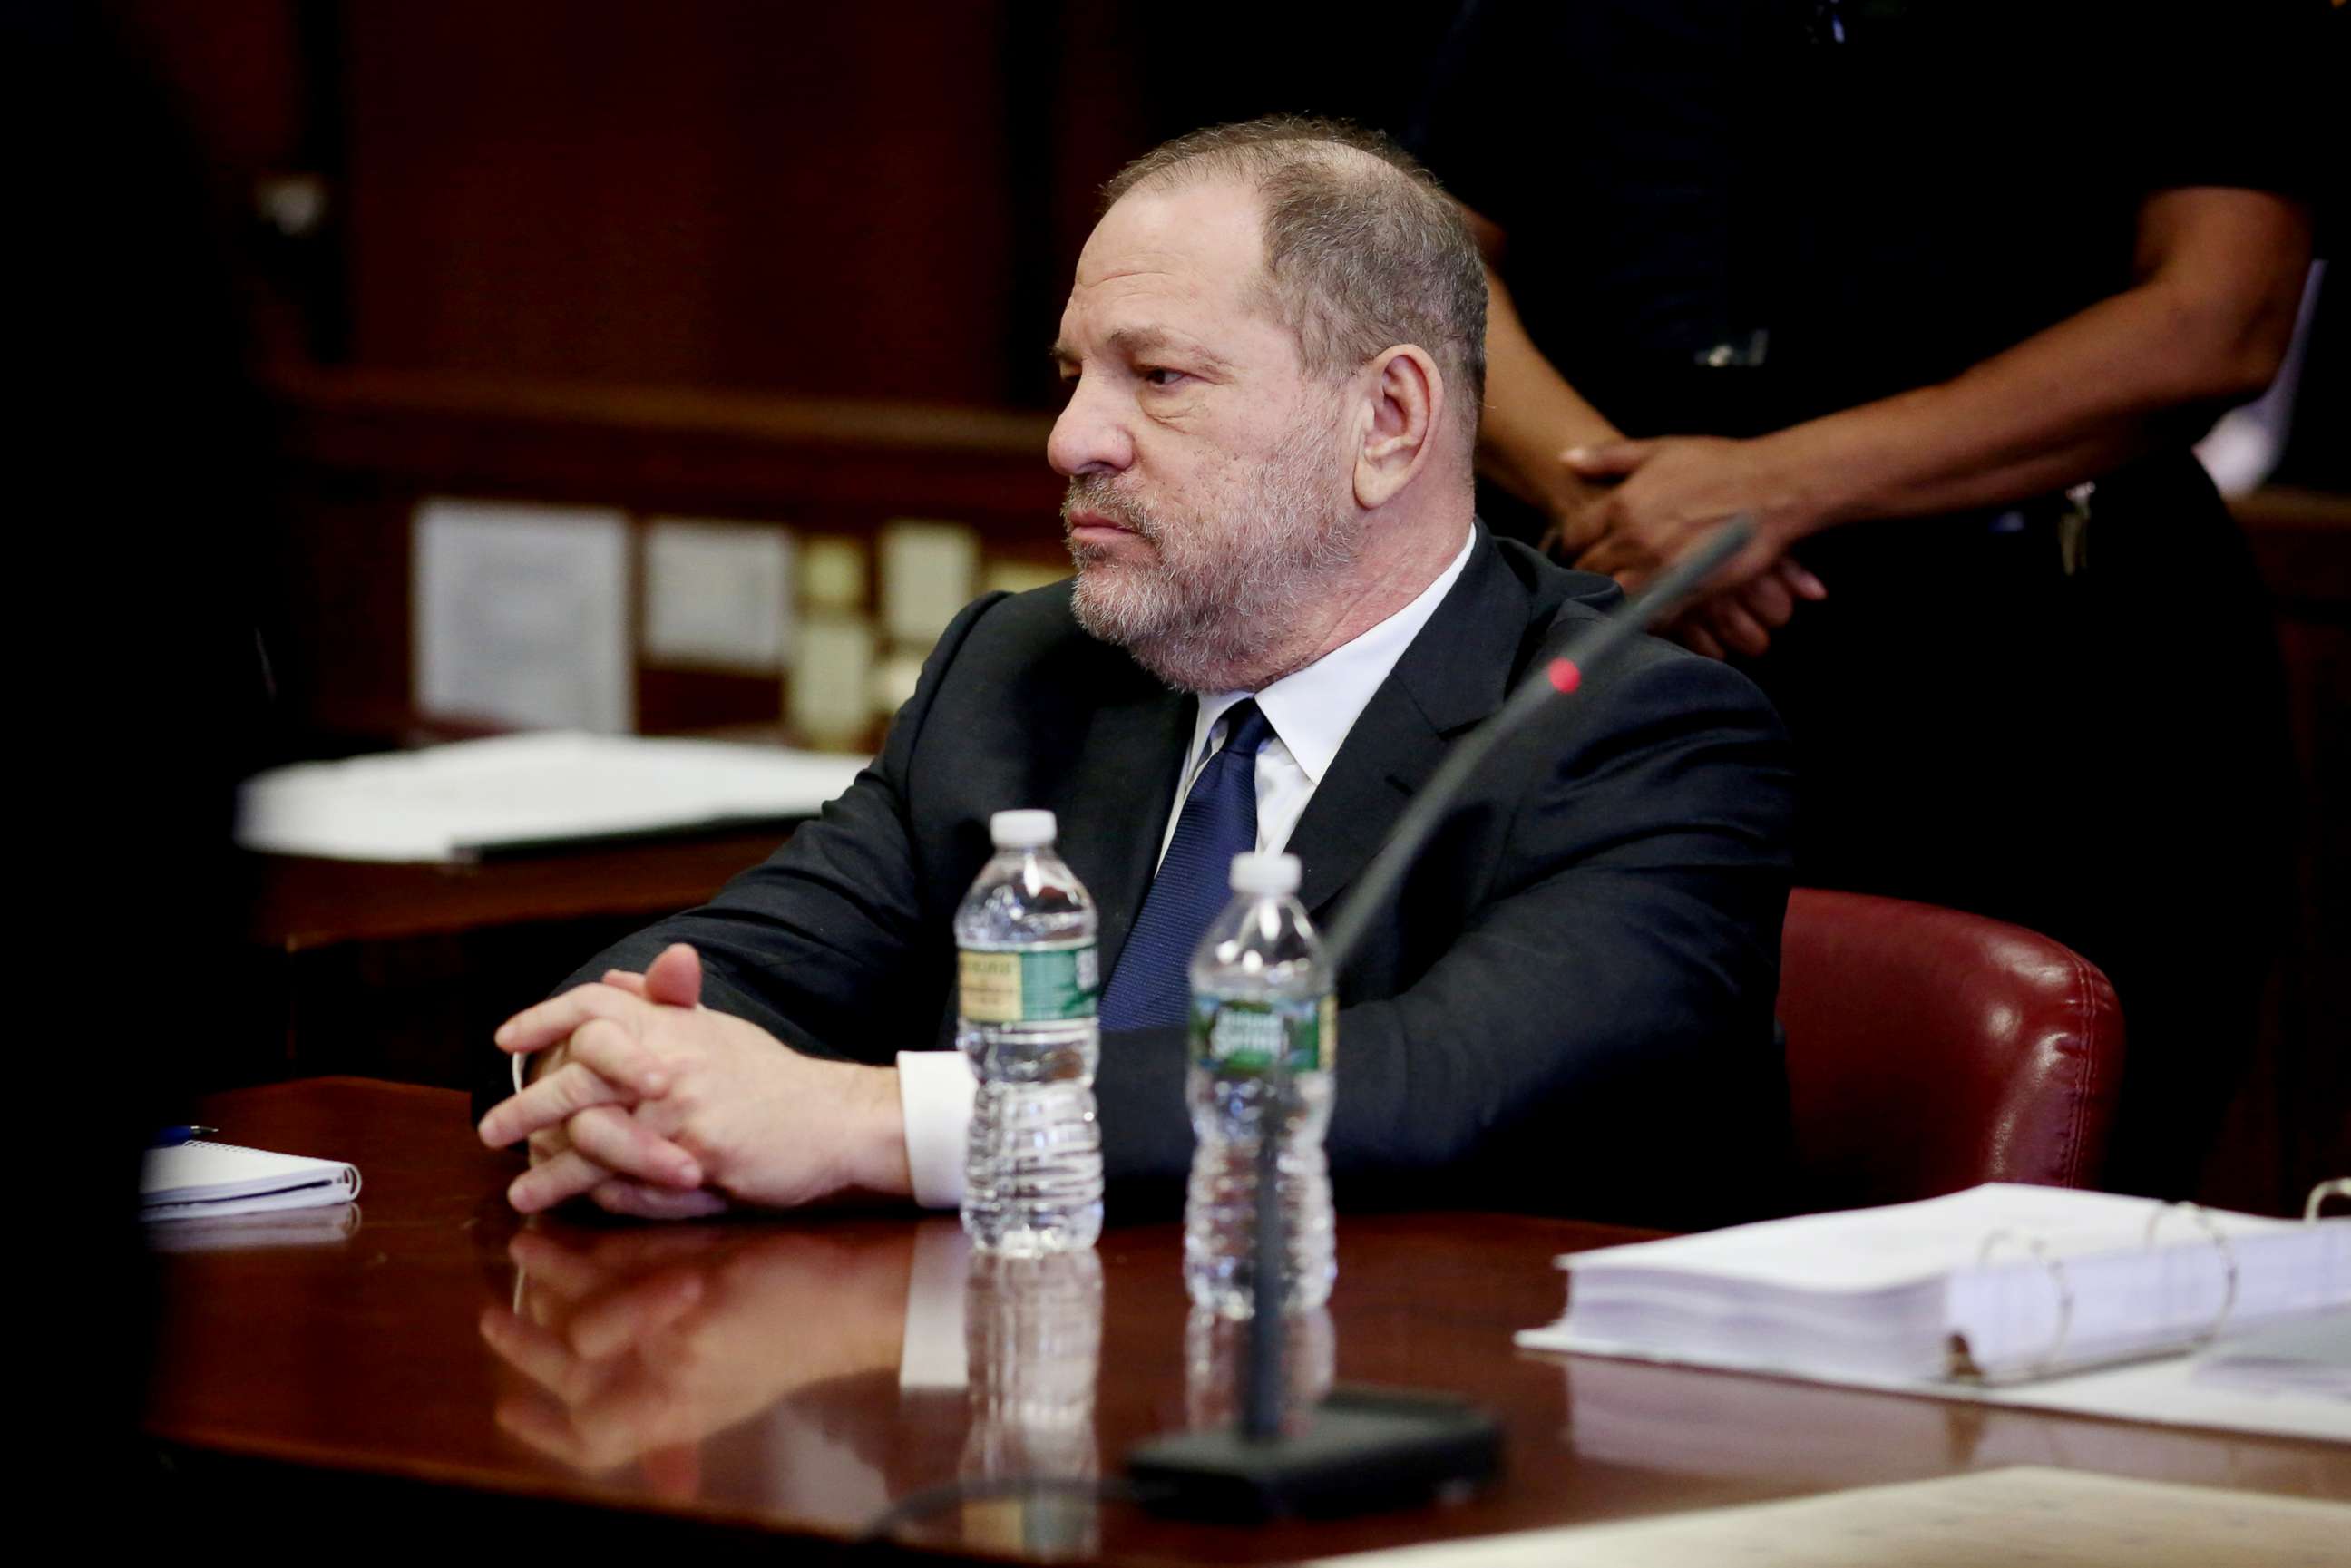 PHOTO: Film producer Harvey Weinstein attends a hearing in New York State Supreme Court in N.Y, Dec. 20, 2018.